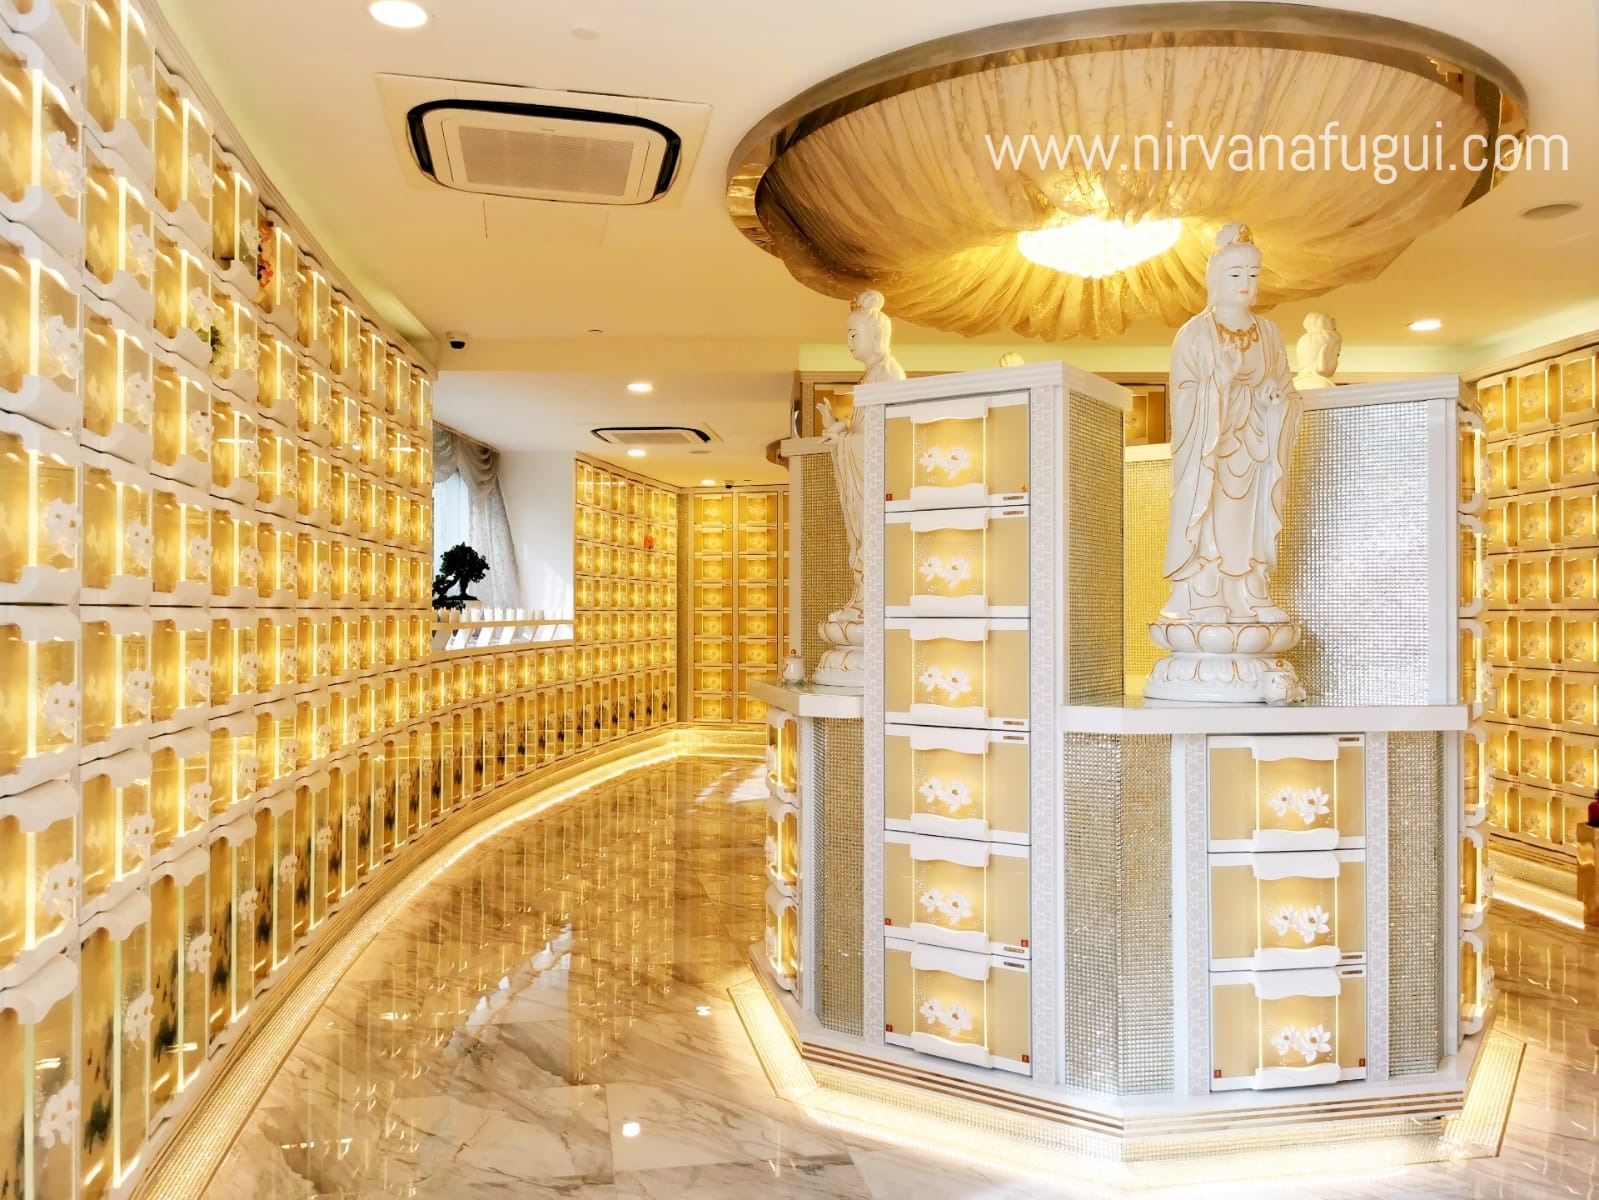 A columbarium suite for departed Buddhist devotees at Nirvana Singapore